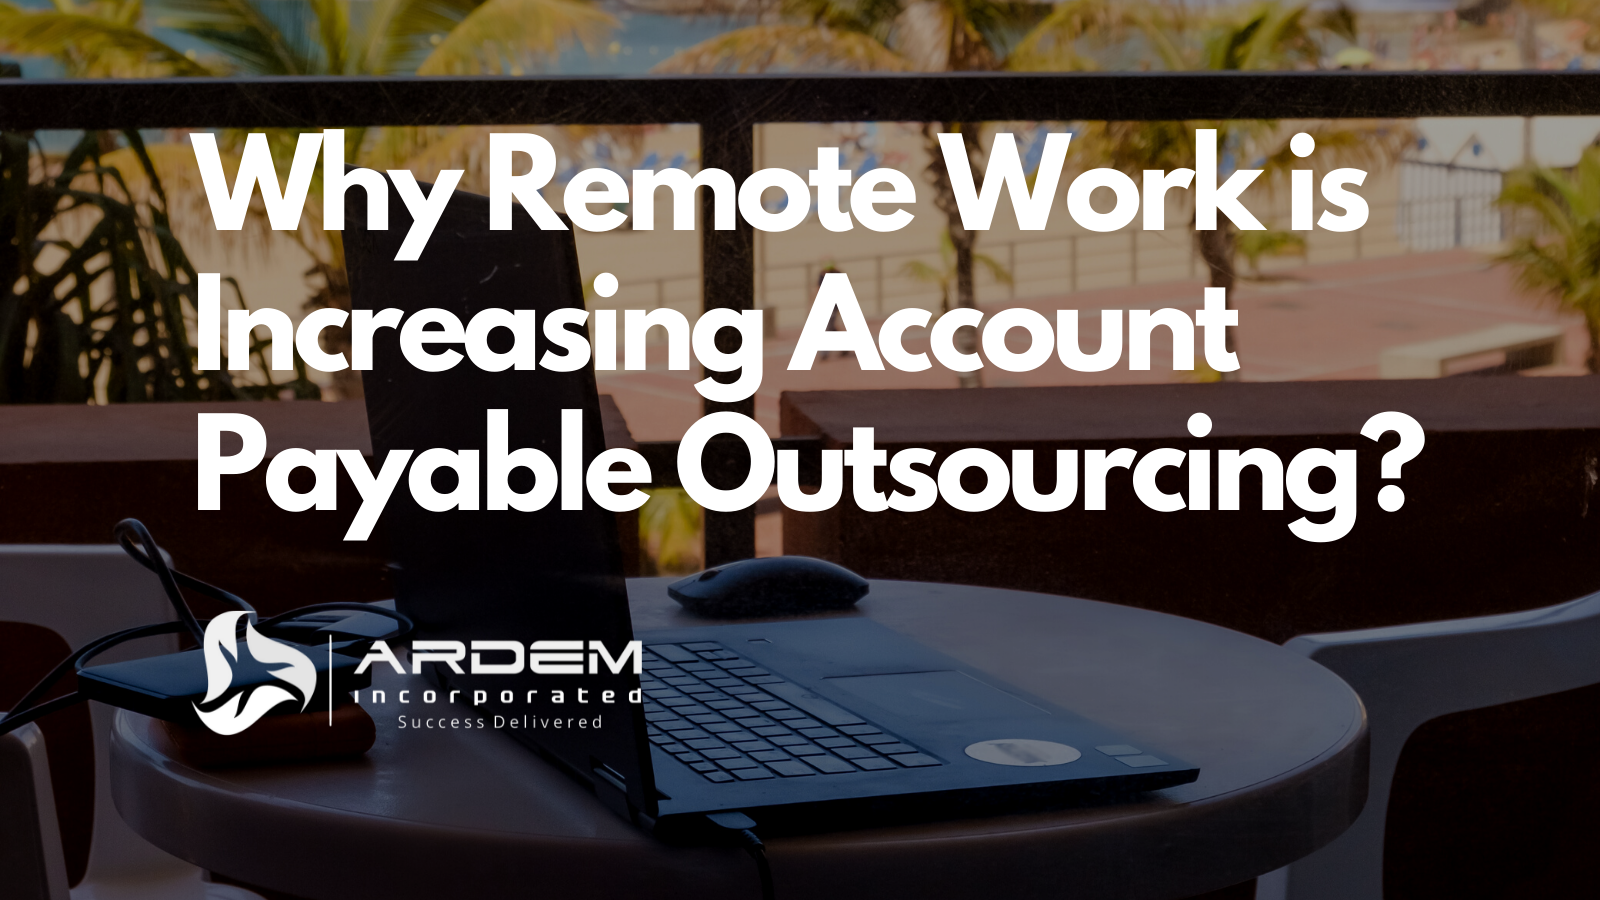 Account Payable Outsourcing Remote Work Blog